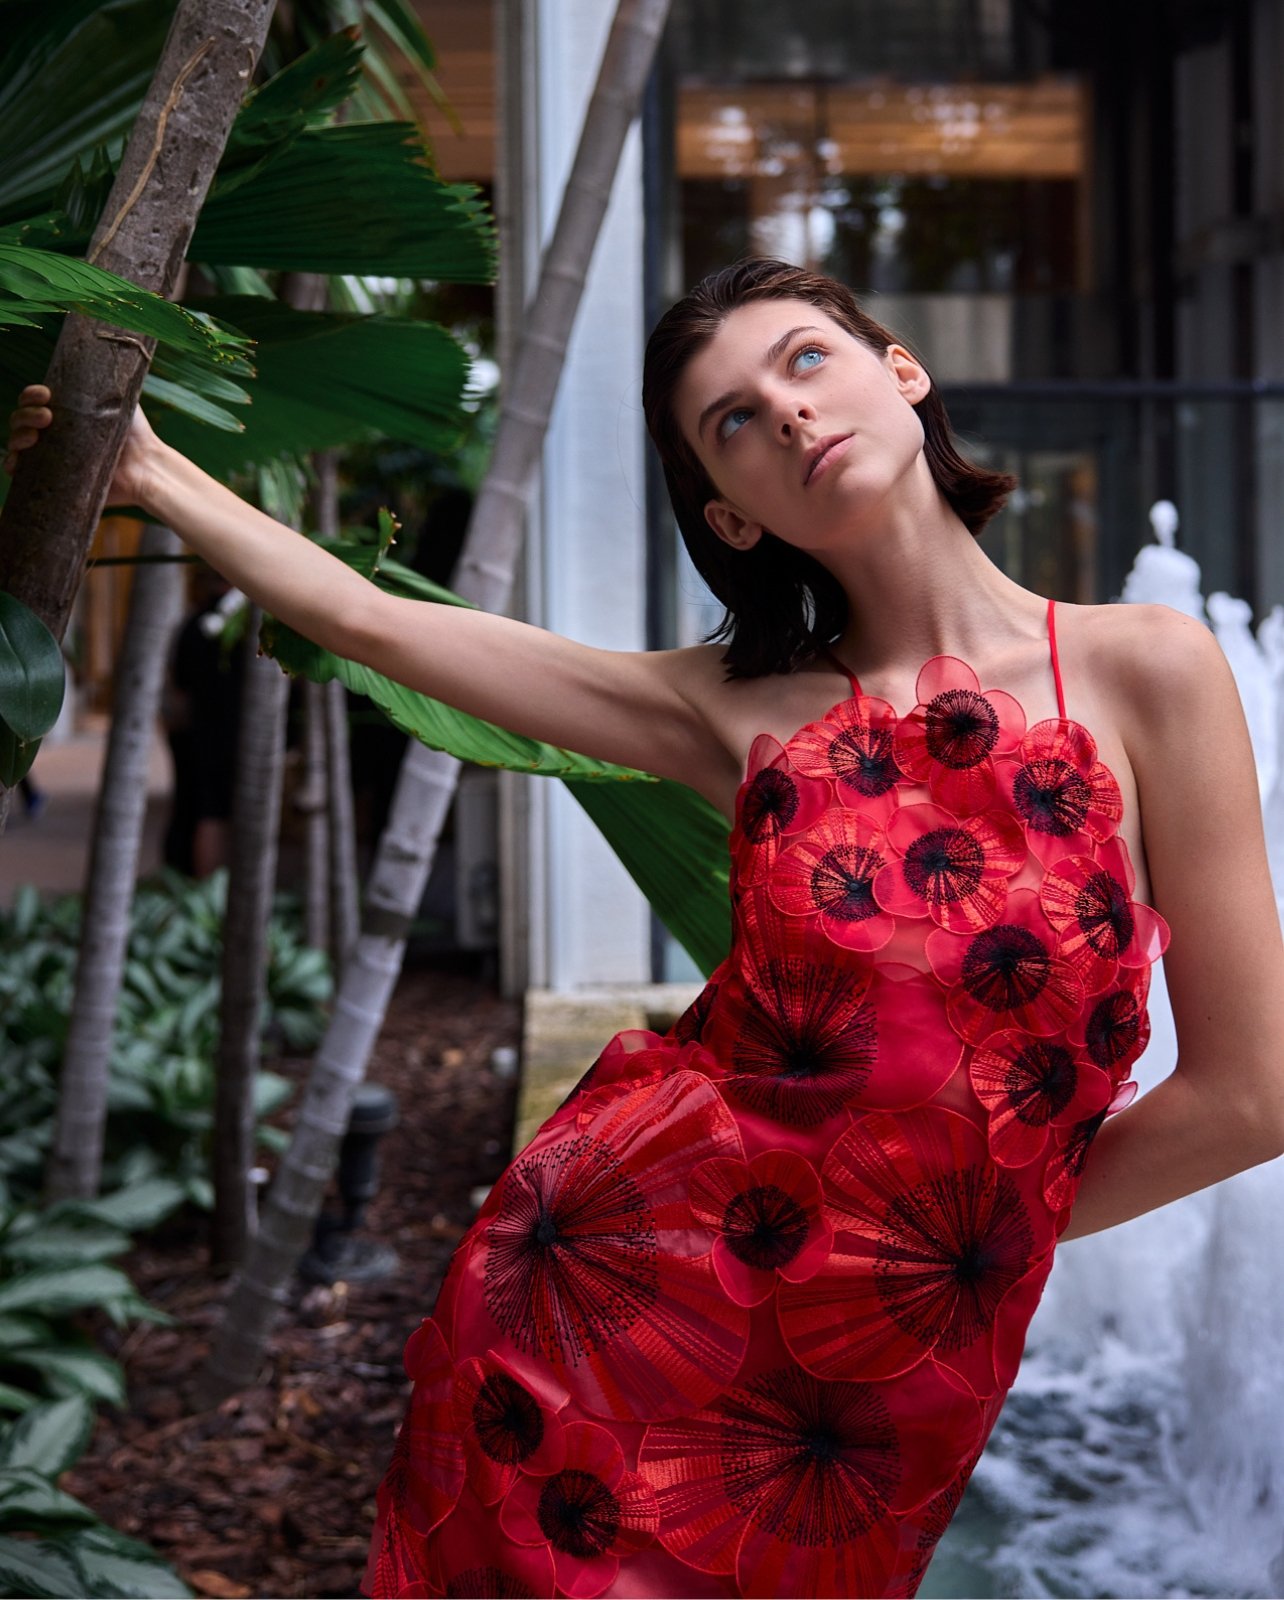 Model posing at Bal Harbour Shops wearing a red mini dress with 3D floral details